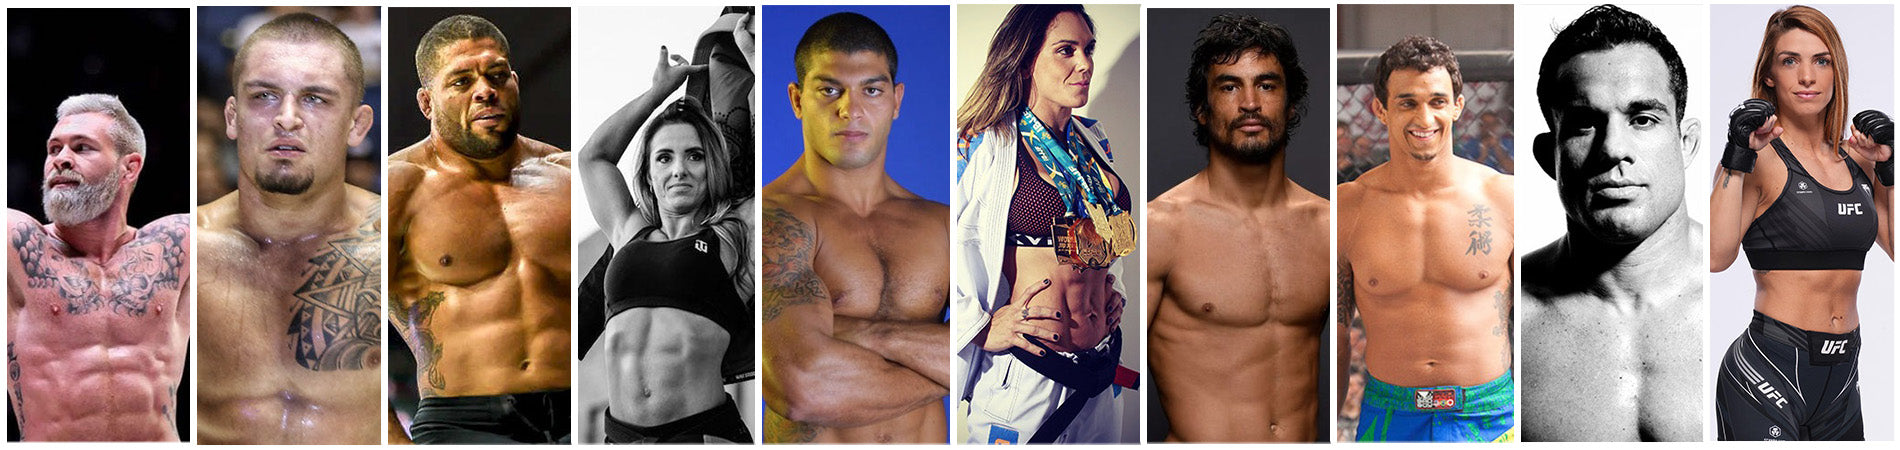 10 Best Decorated BJJ Fighters